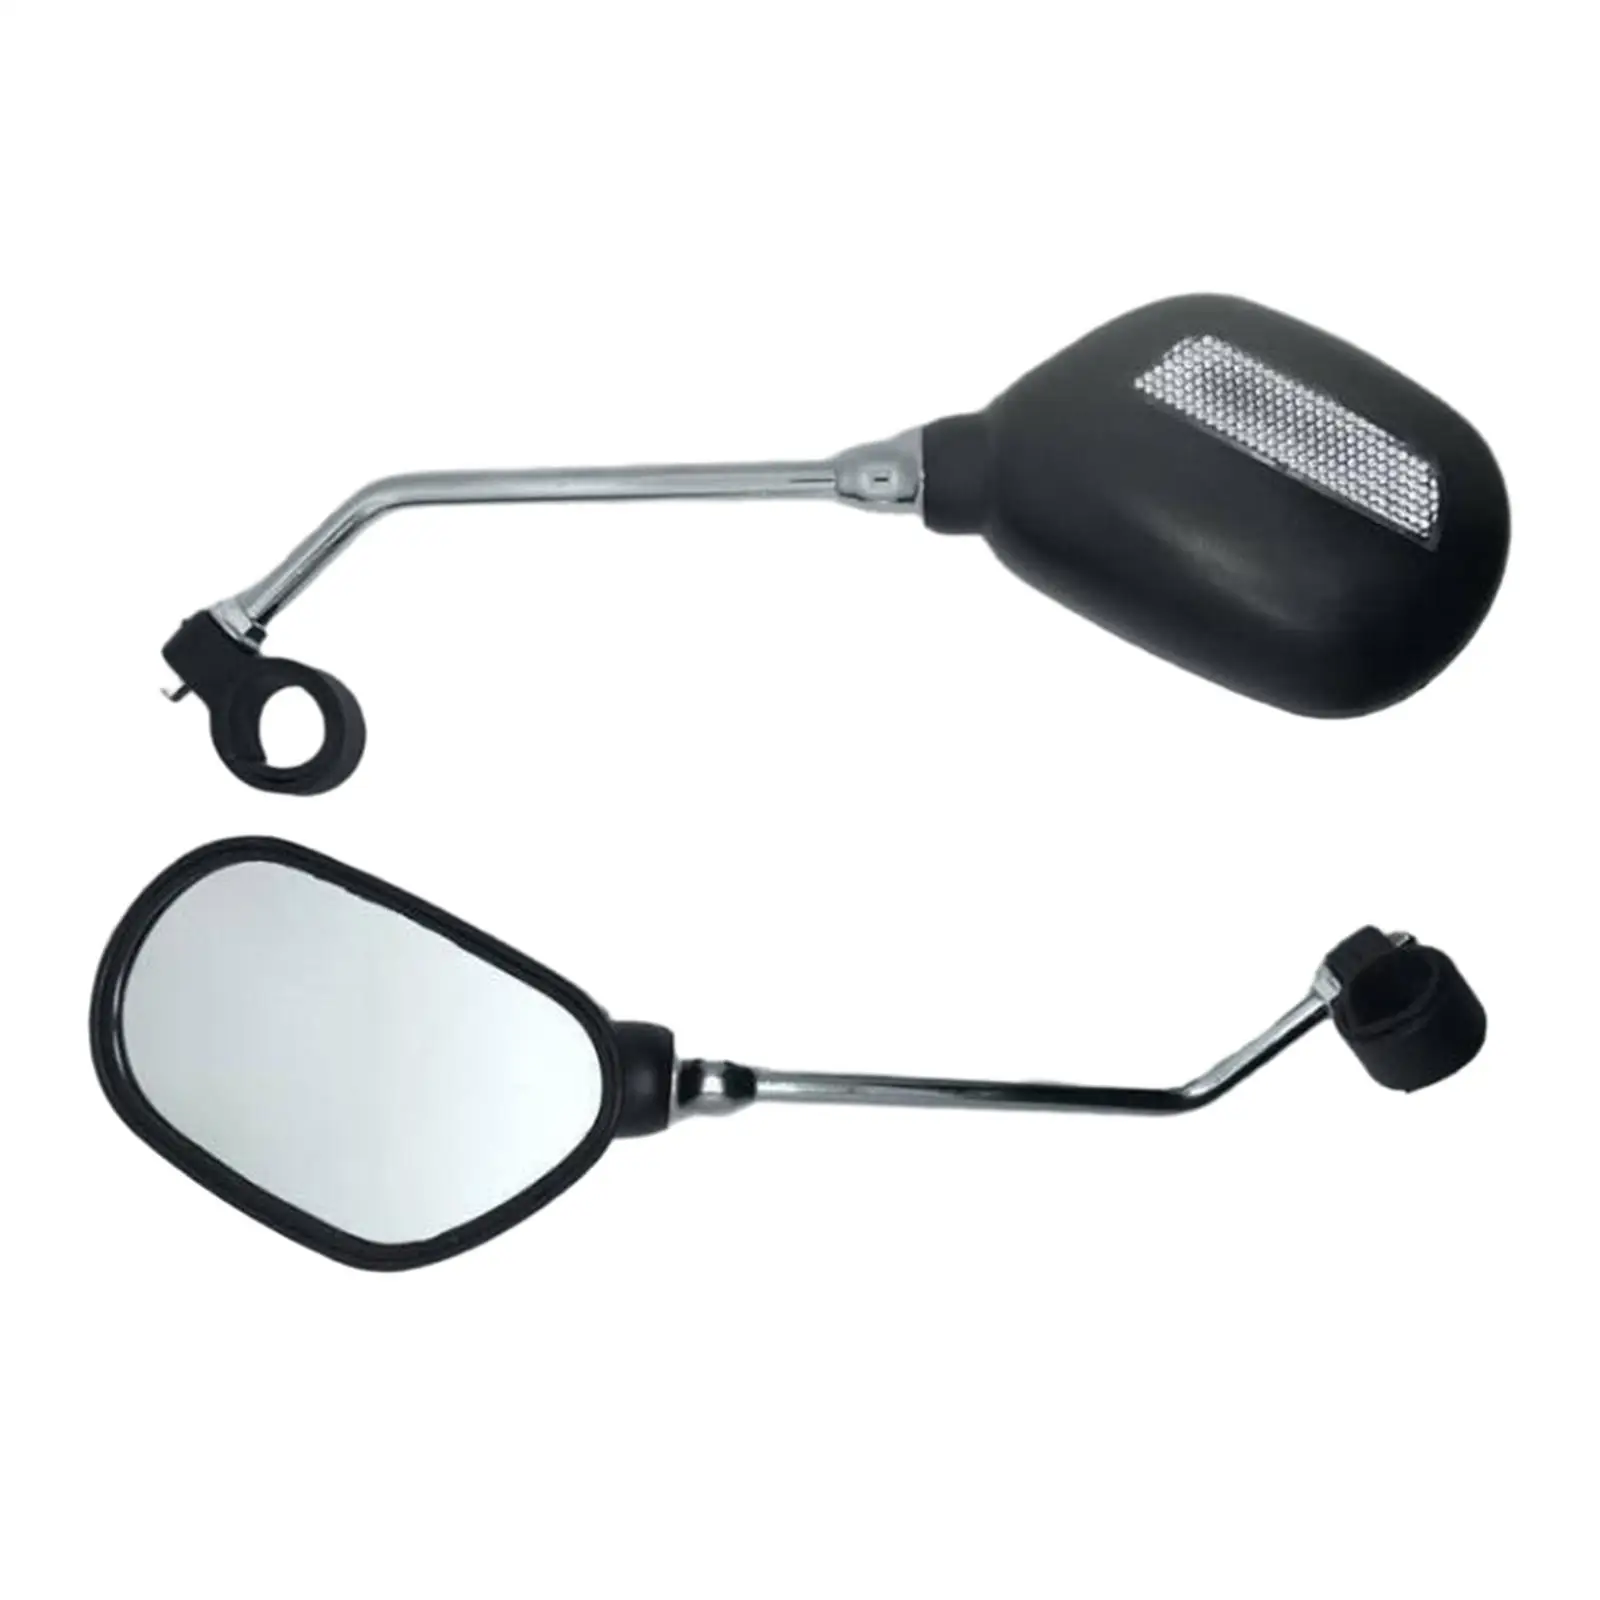 Bike Mirror Bicycle Rear View Mirror for Mountain Bike and Road Bike Riding